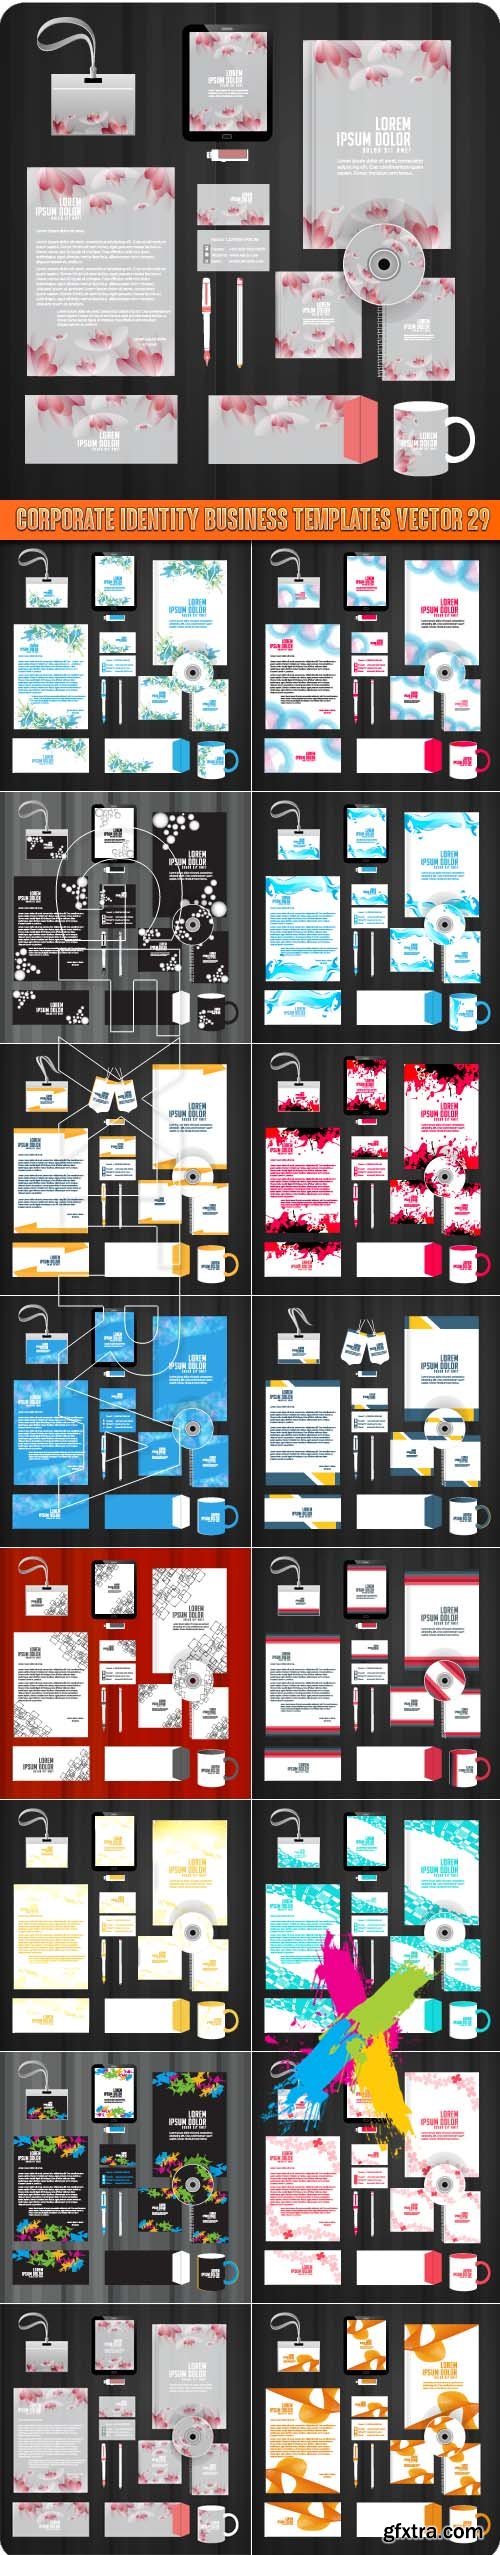 Corporate identity business templates vector 29